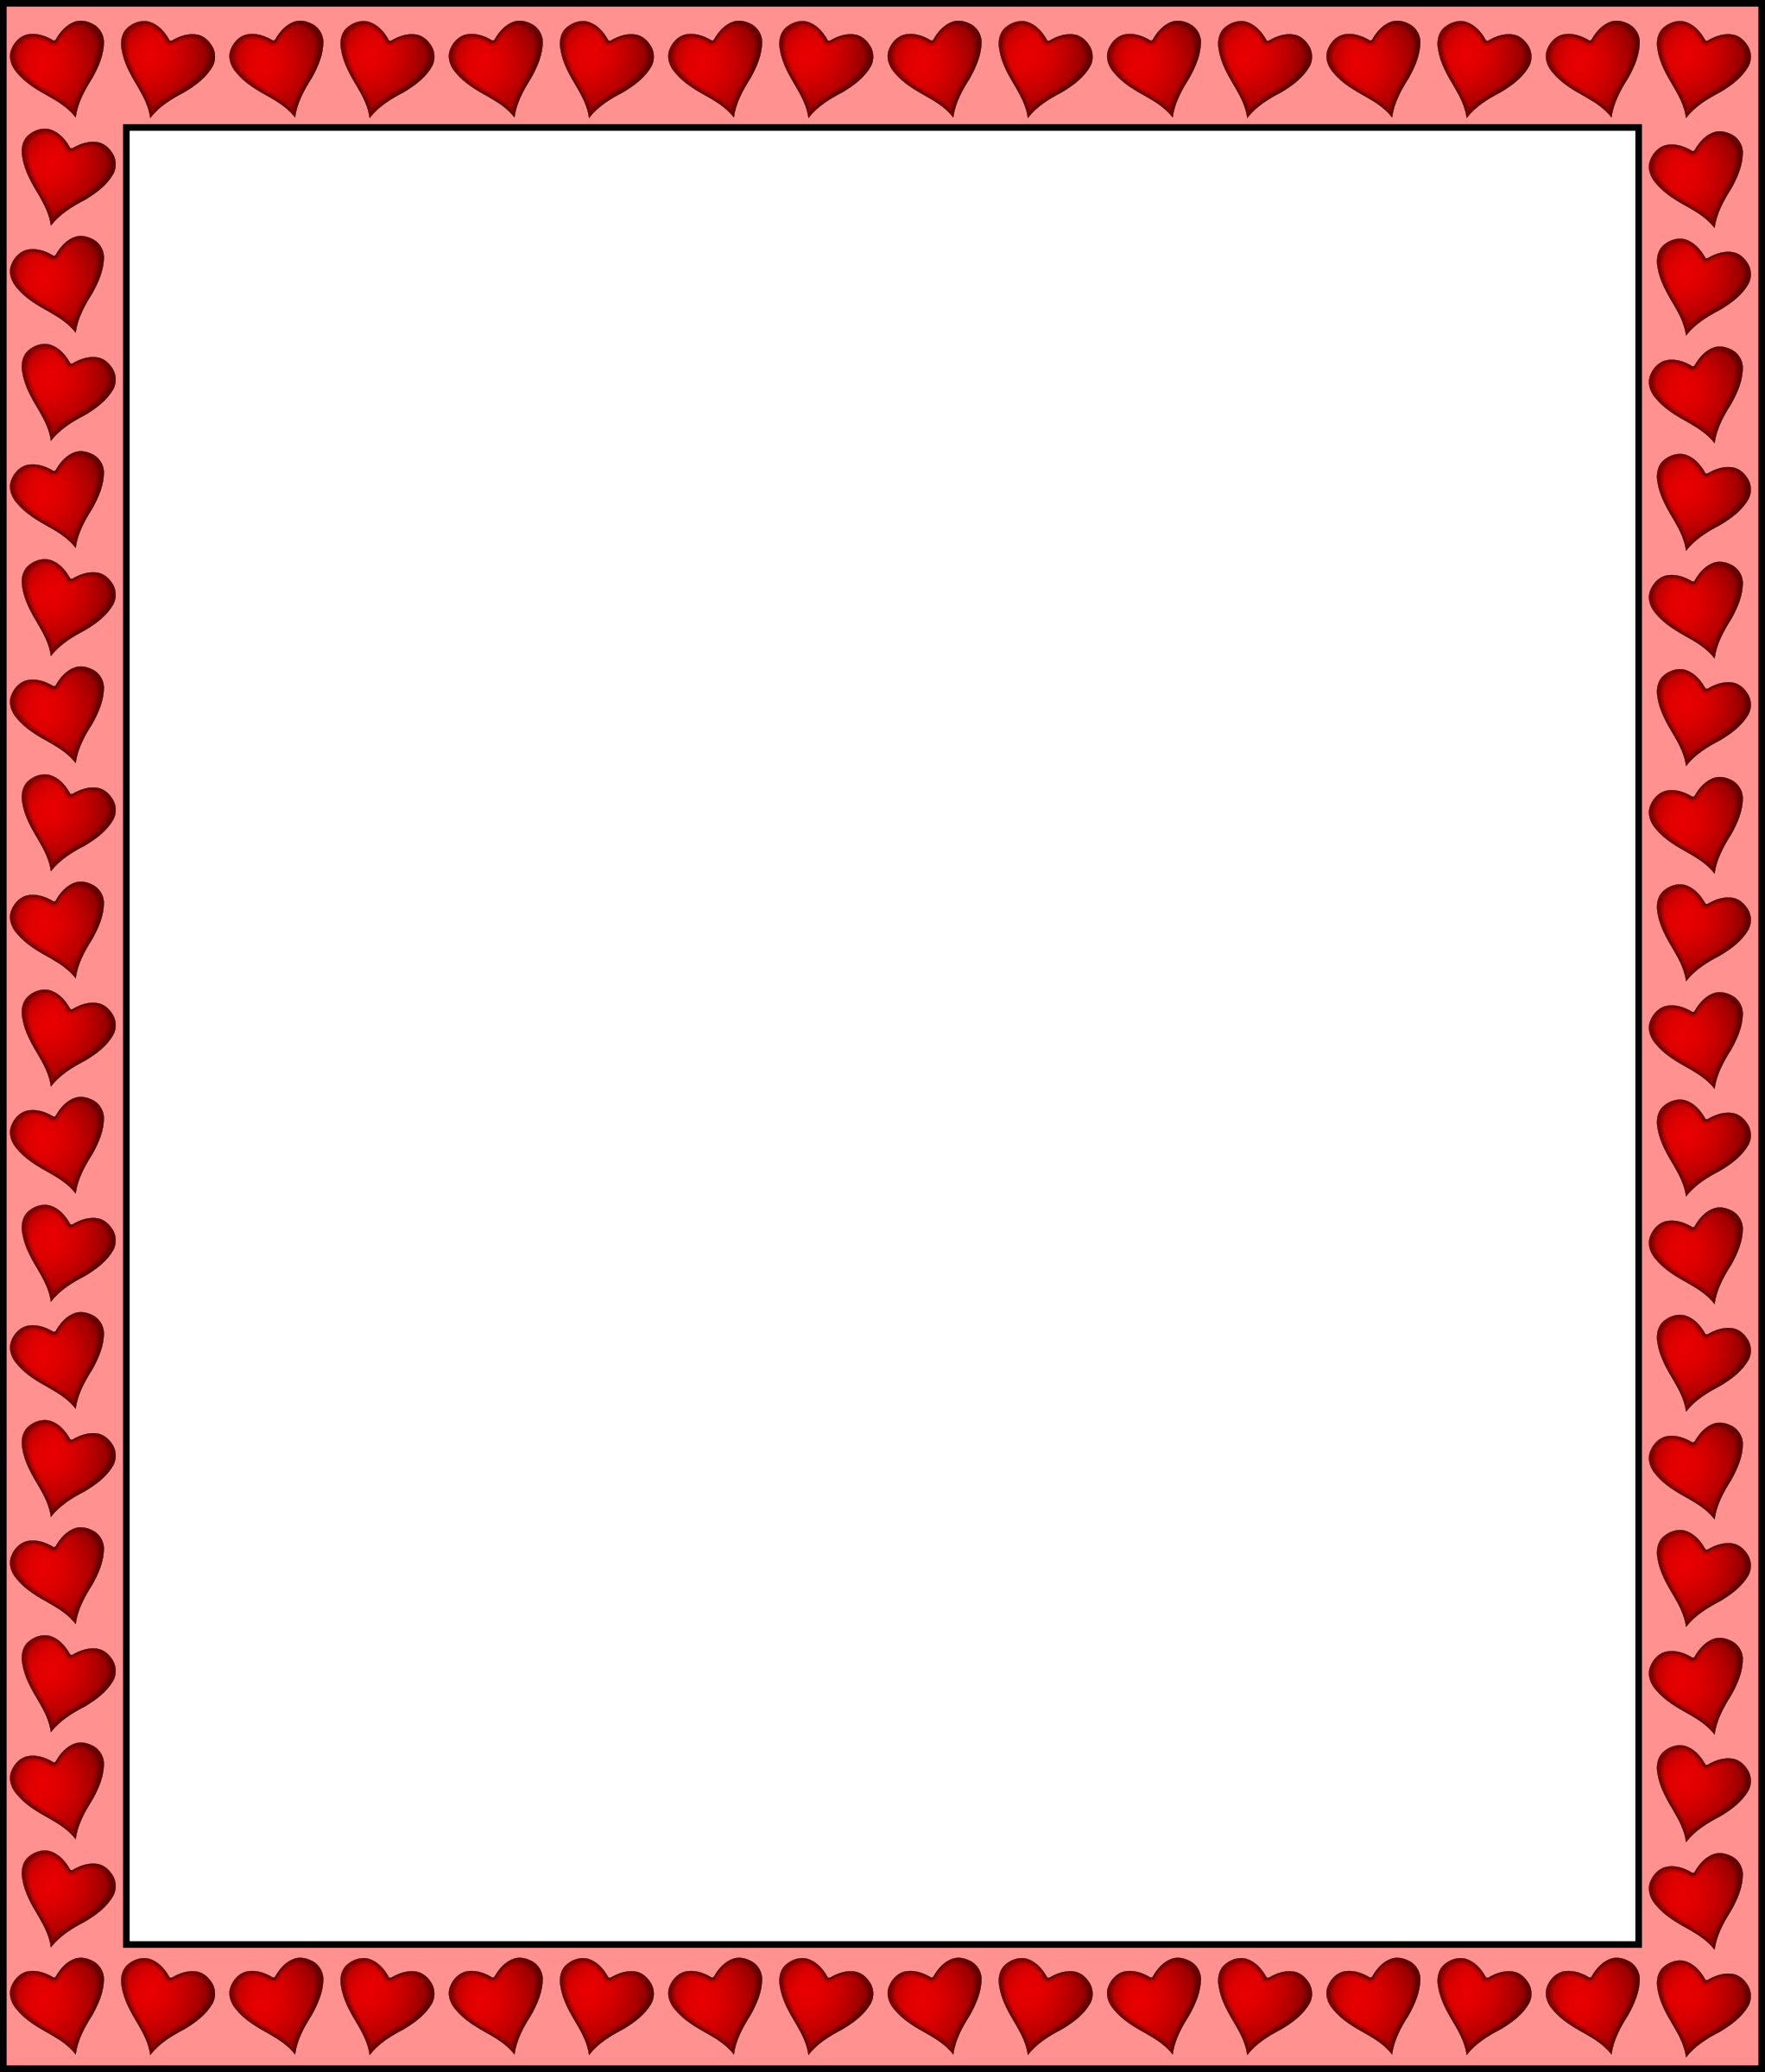 Download Clipart - Heart frame